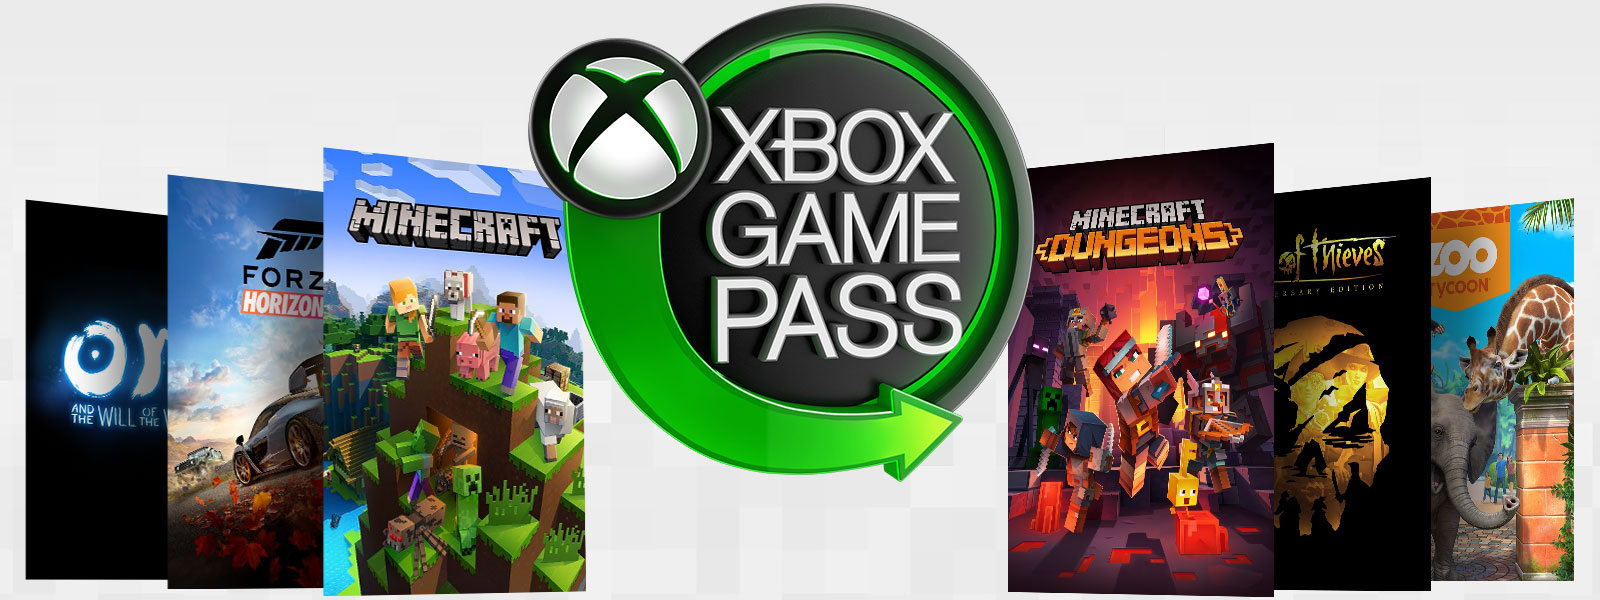 is minecraft windows 10 on xbox game pass for pc